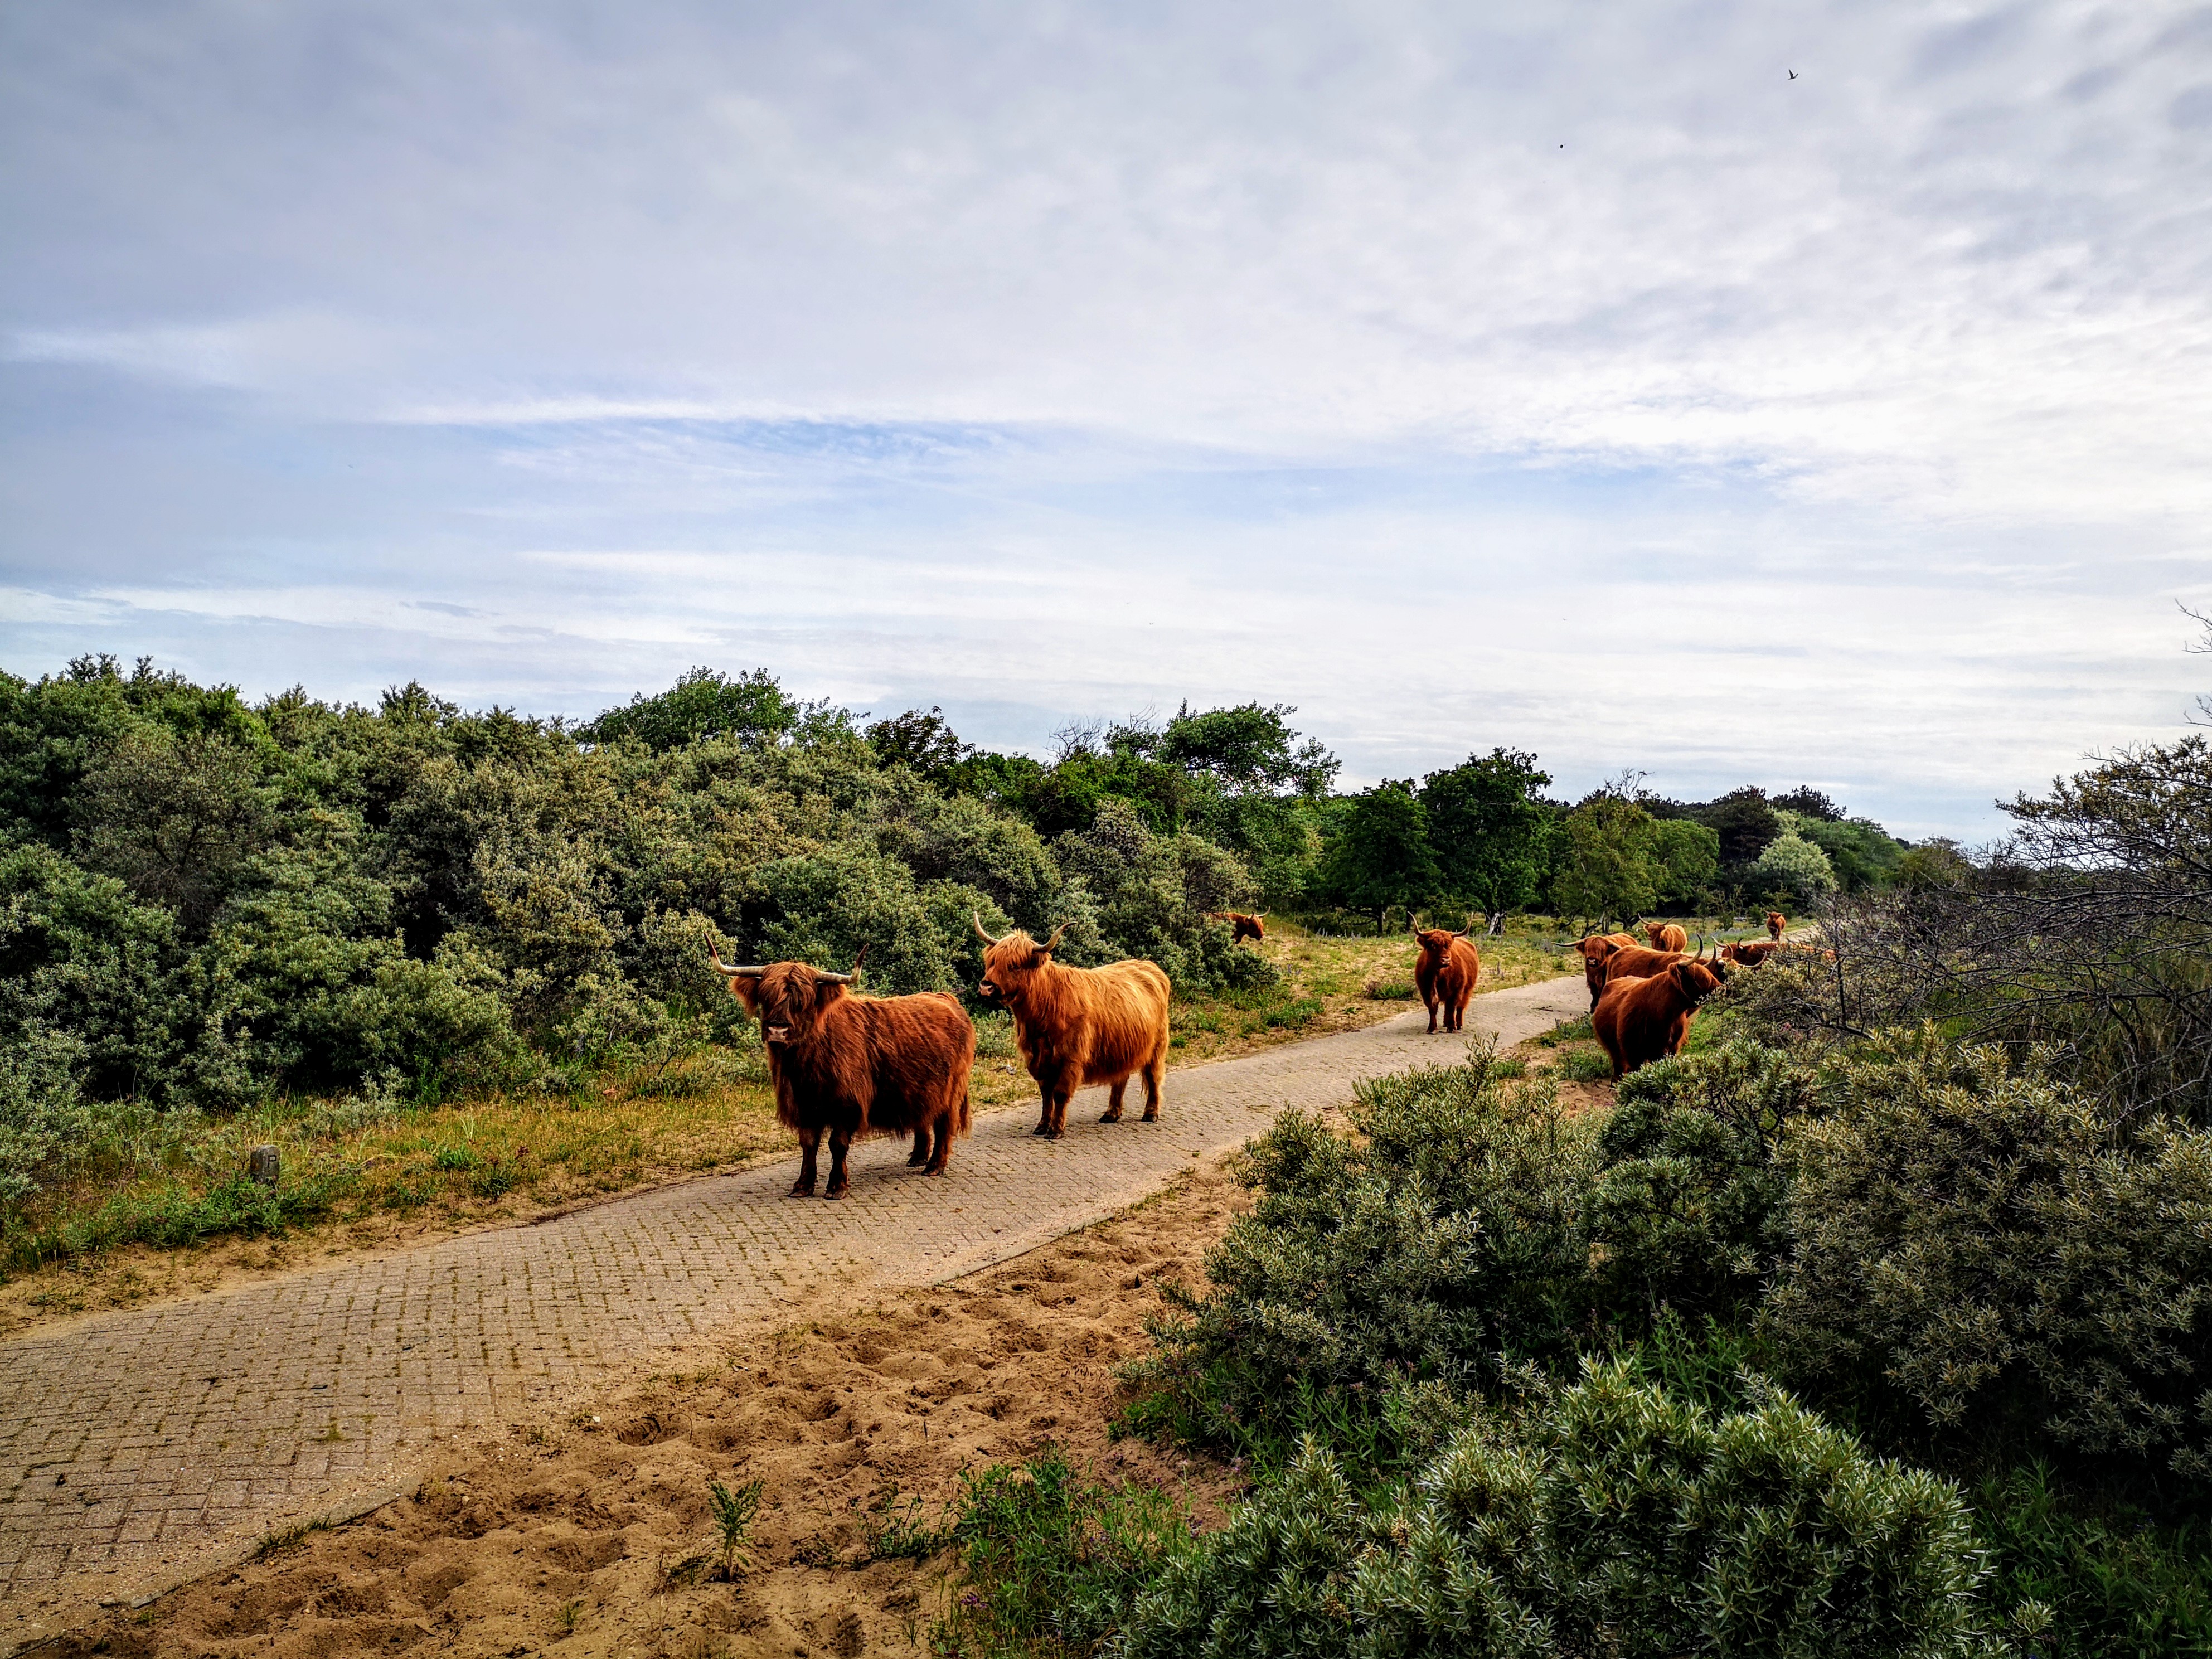 Hiking the Dutch Coastal path 2 - Long distance hiking path in The Netherlands